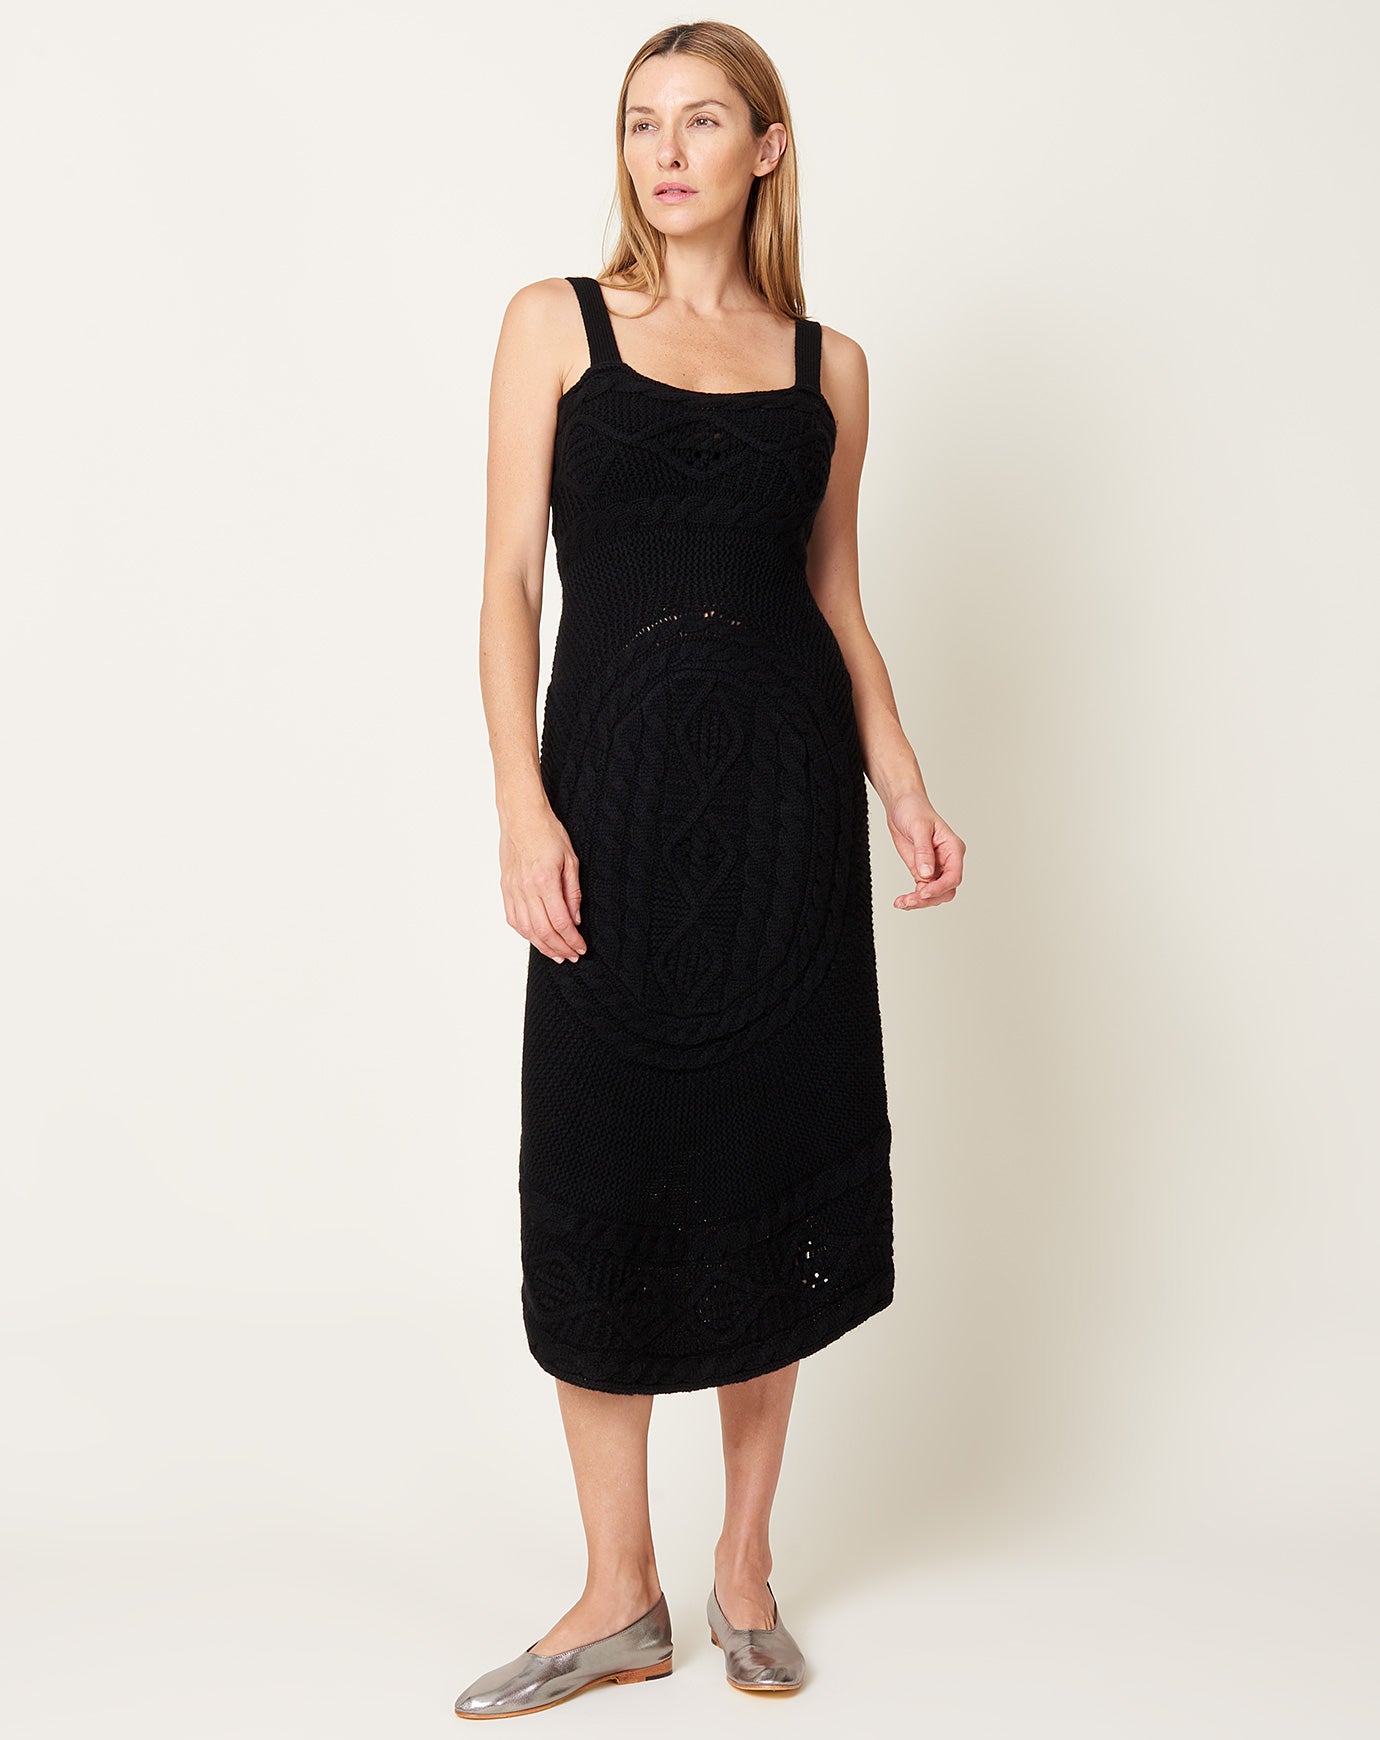 Babaco Round Knit Cable Dress in Black